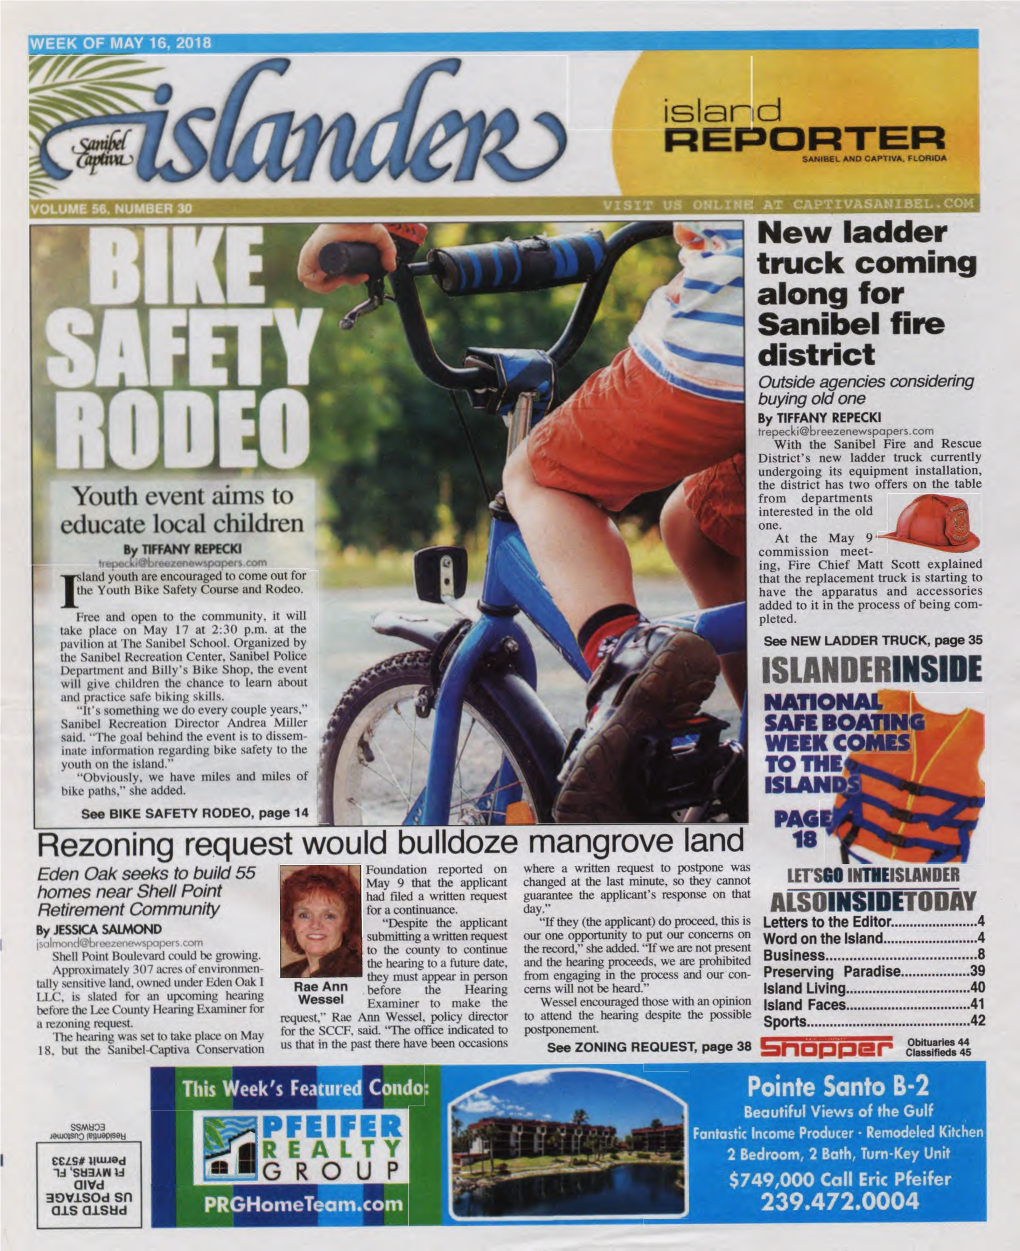 ISLANDERIHSIDE Will Give Children the Chance to Learn About and Practice Safe Biking Skills